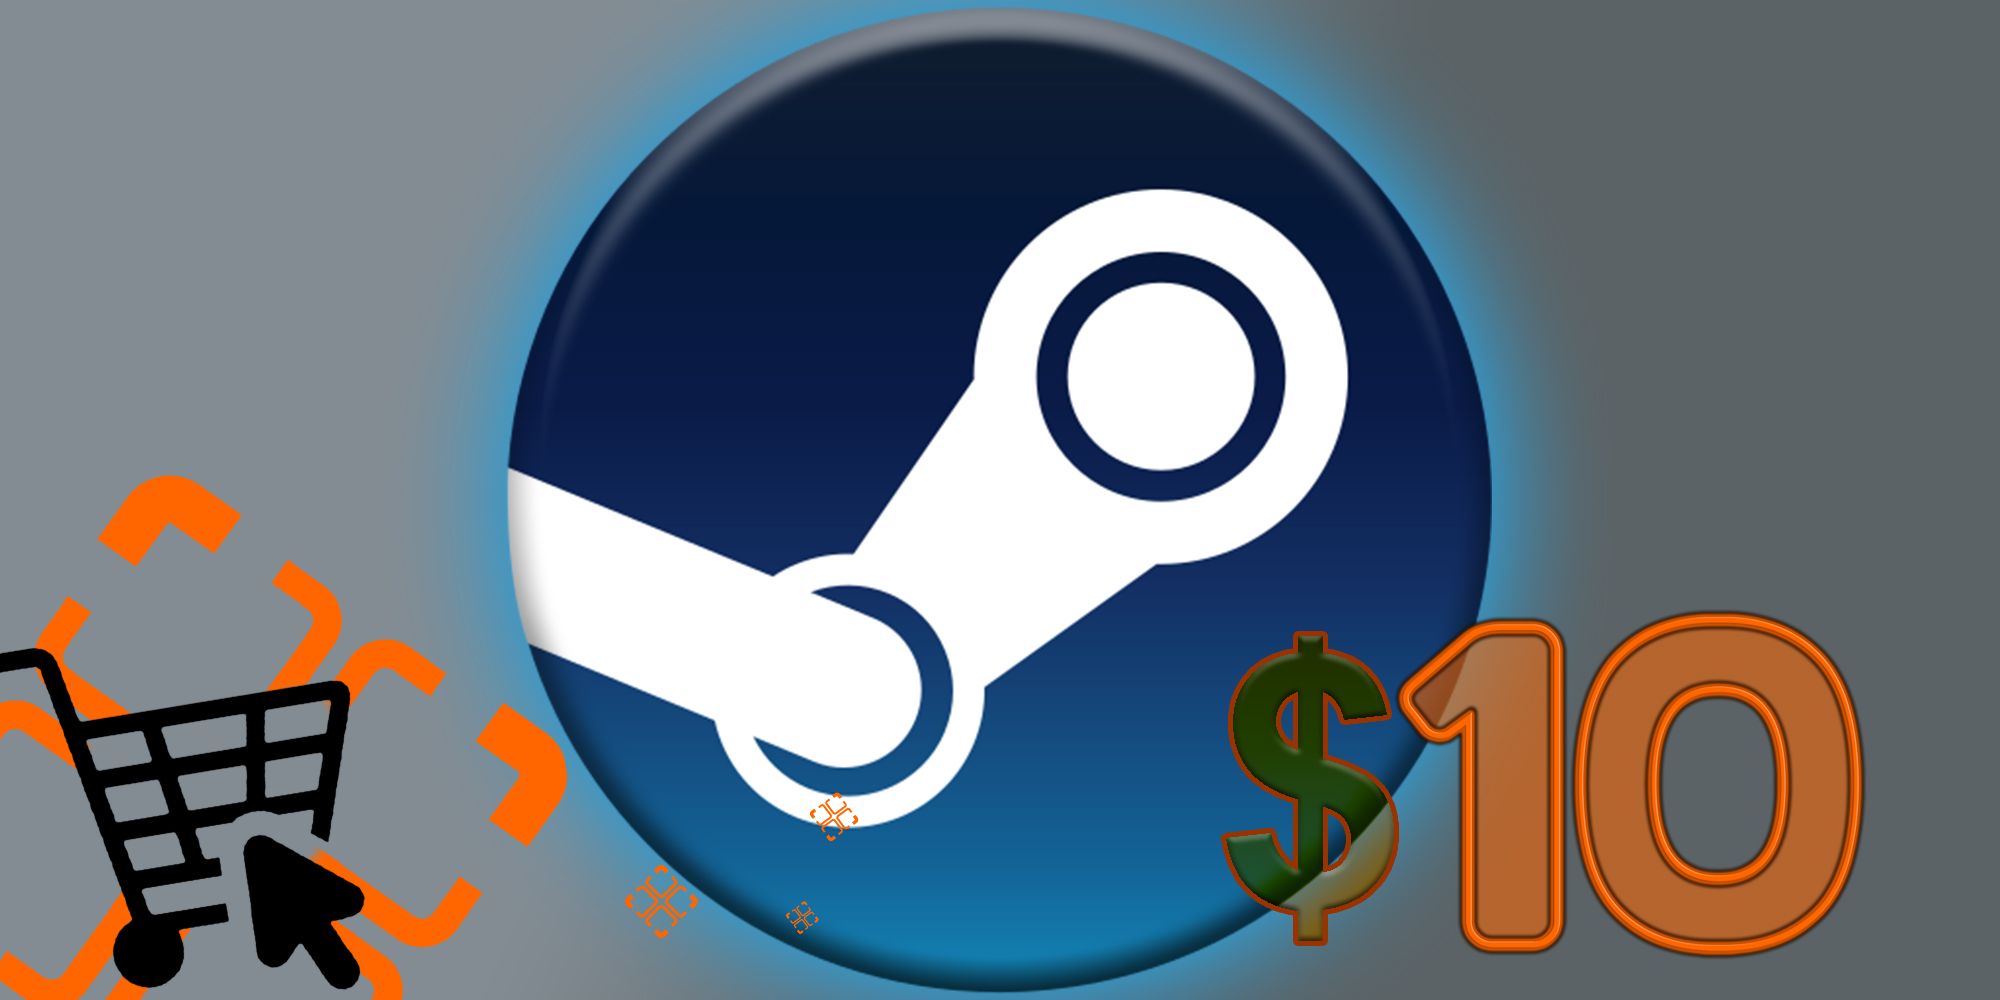 Background: The Steam logo against a grey gradiant. Foreground: The signature Gamer buyer's guide icon and orange text that reads 